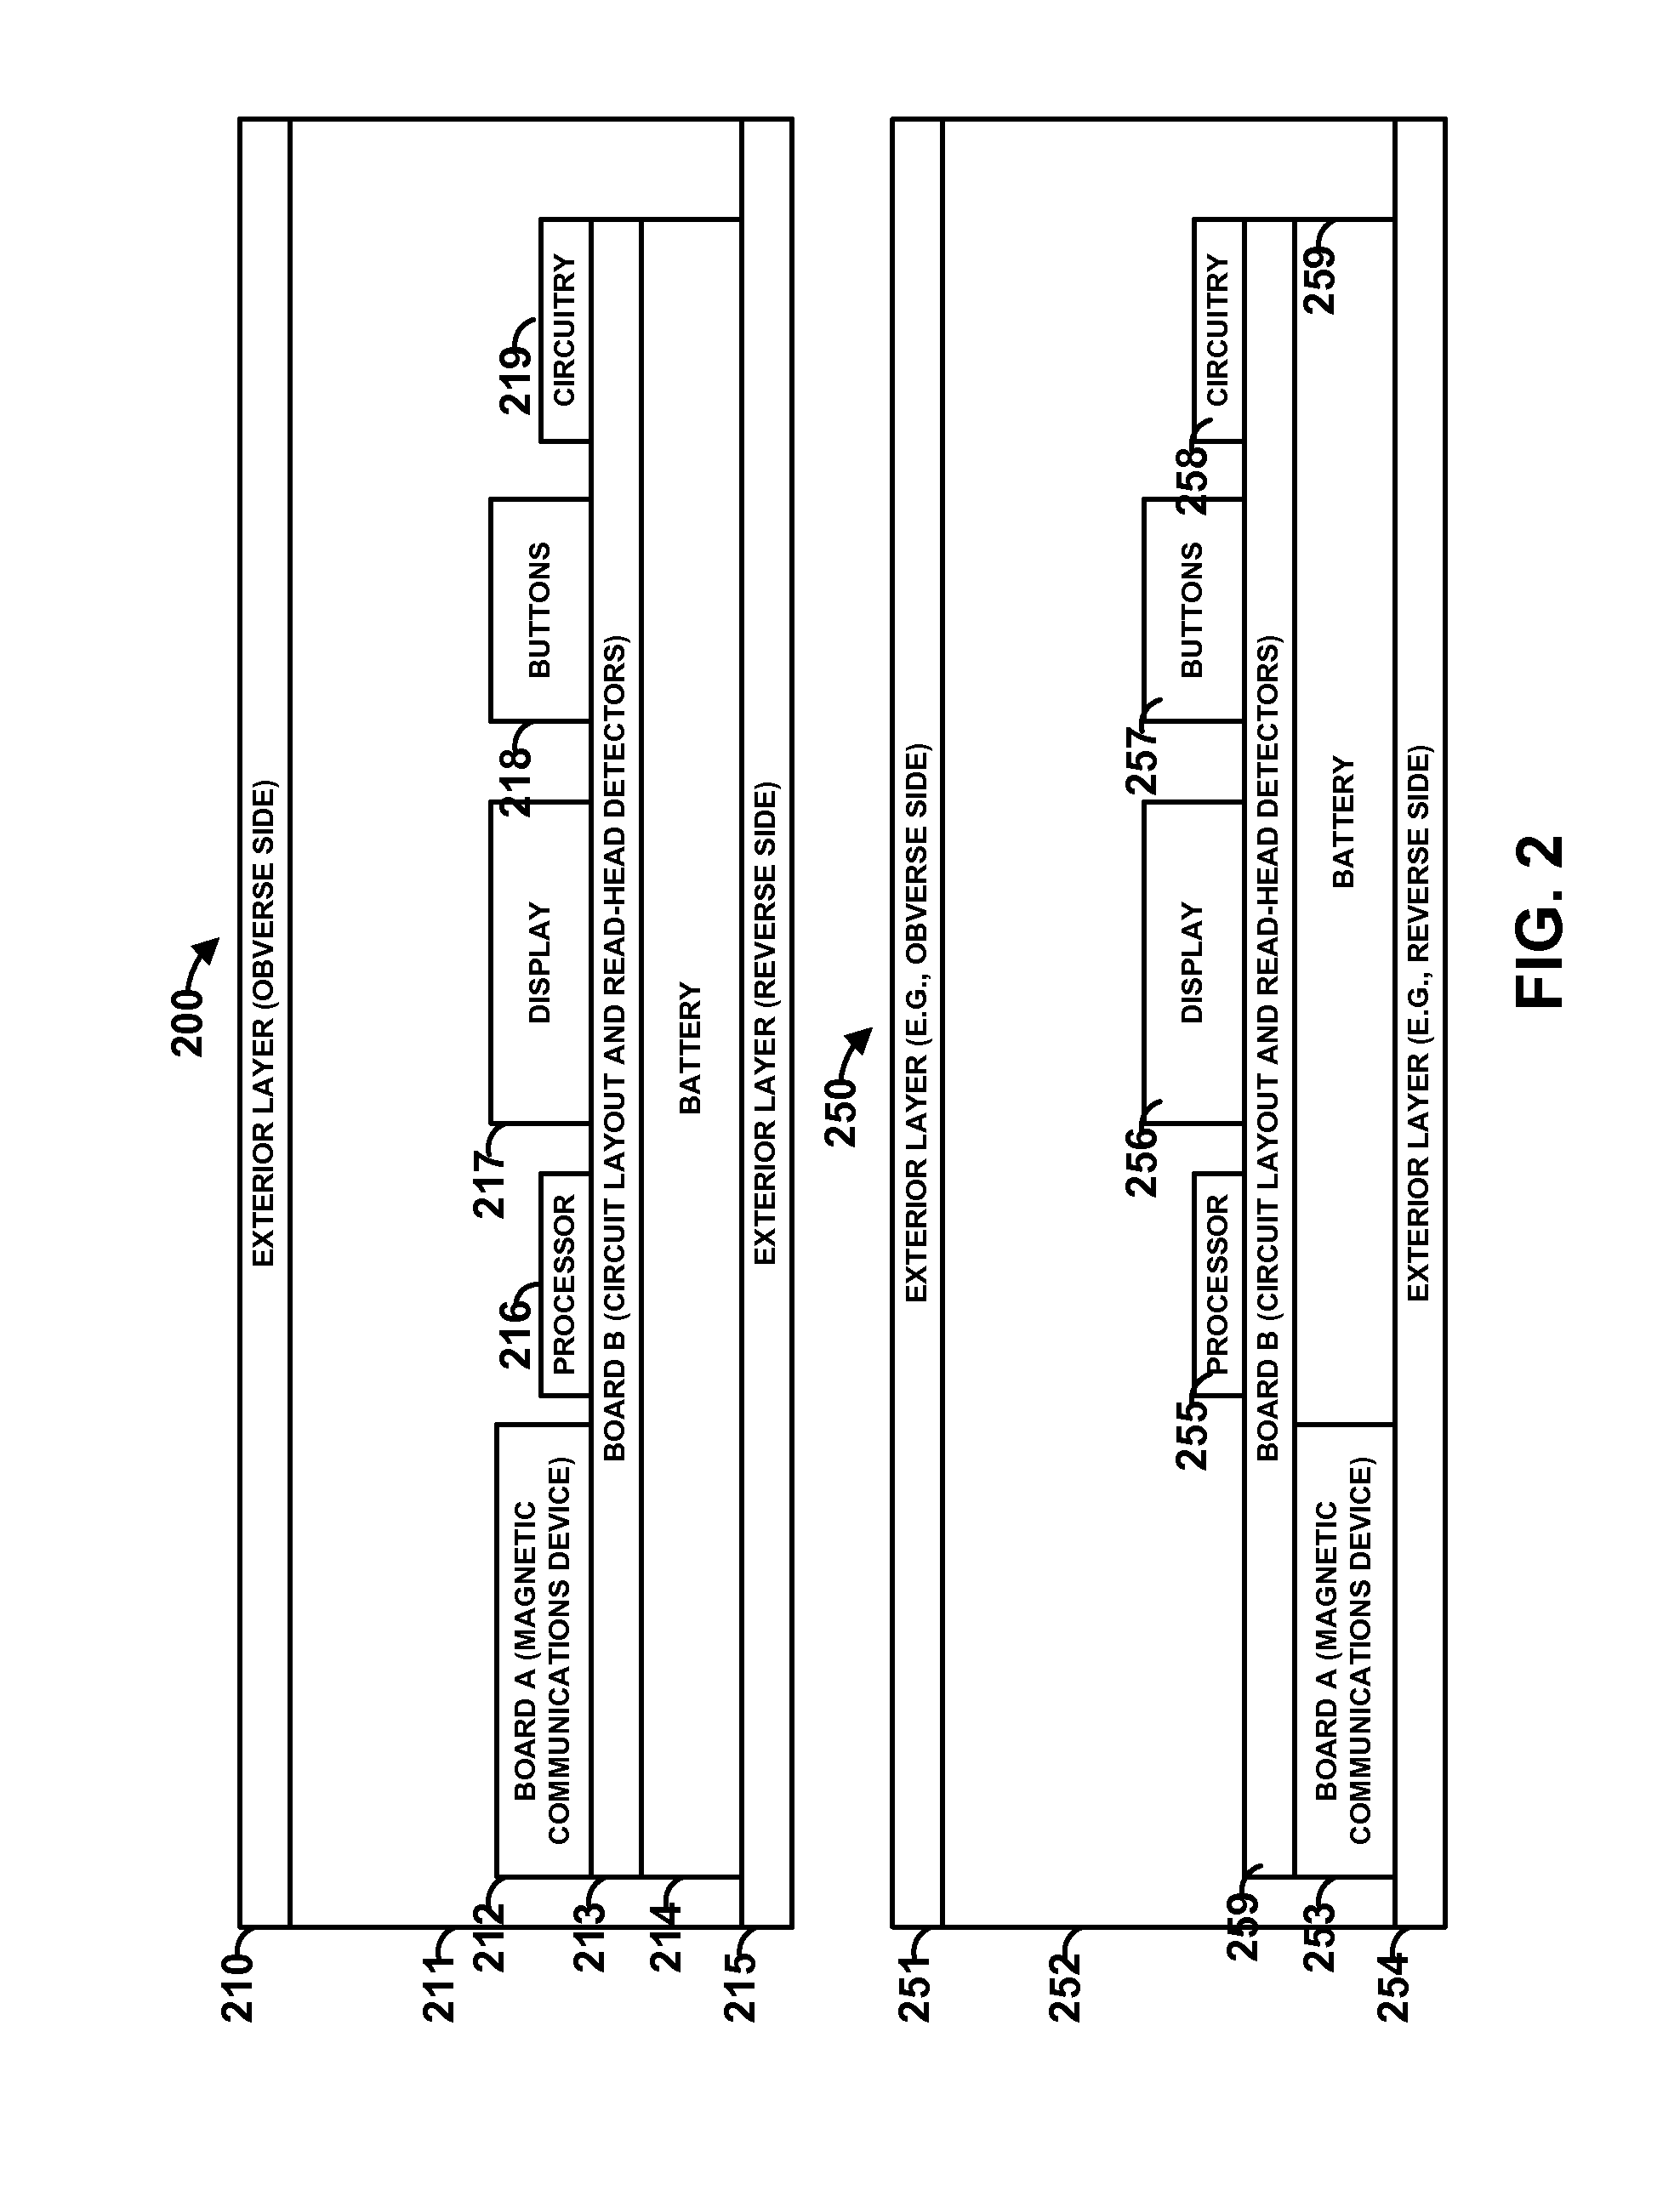 Cards having dynamic magnetic stripe communication devices fabricated from multiple boards